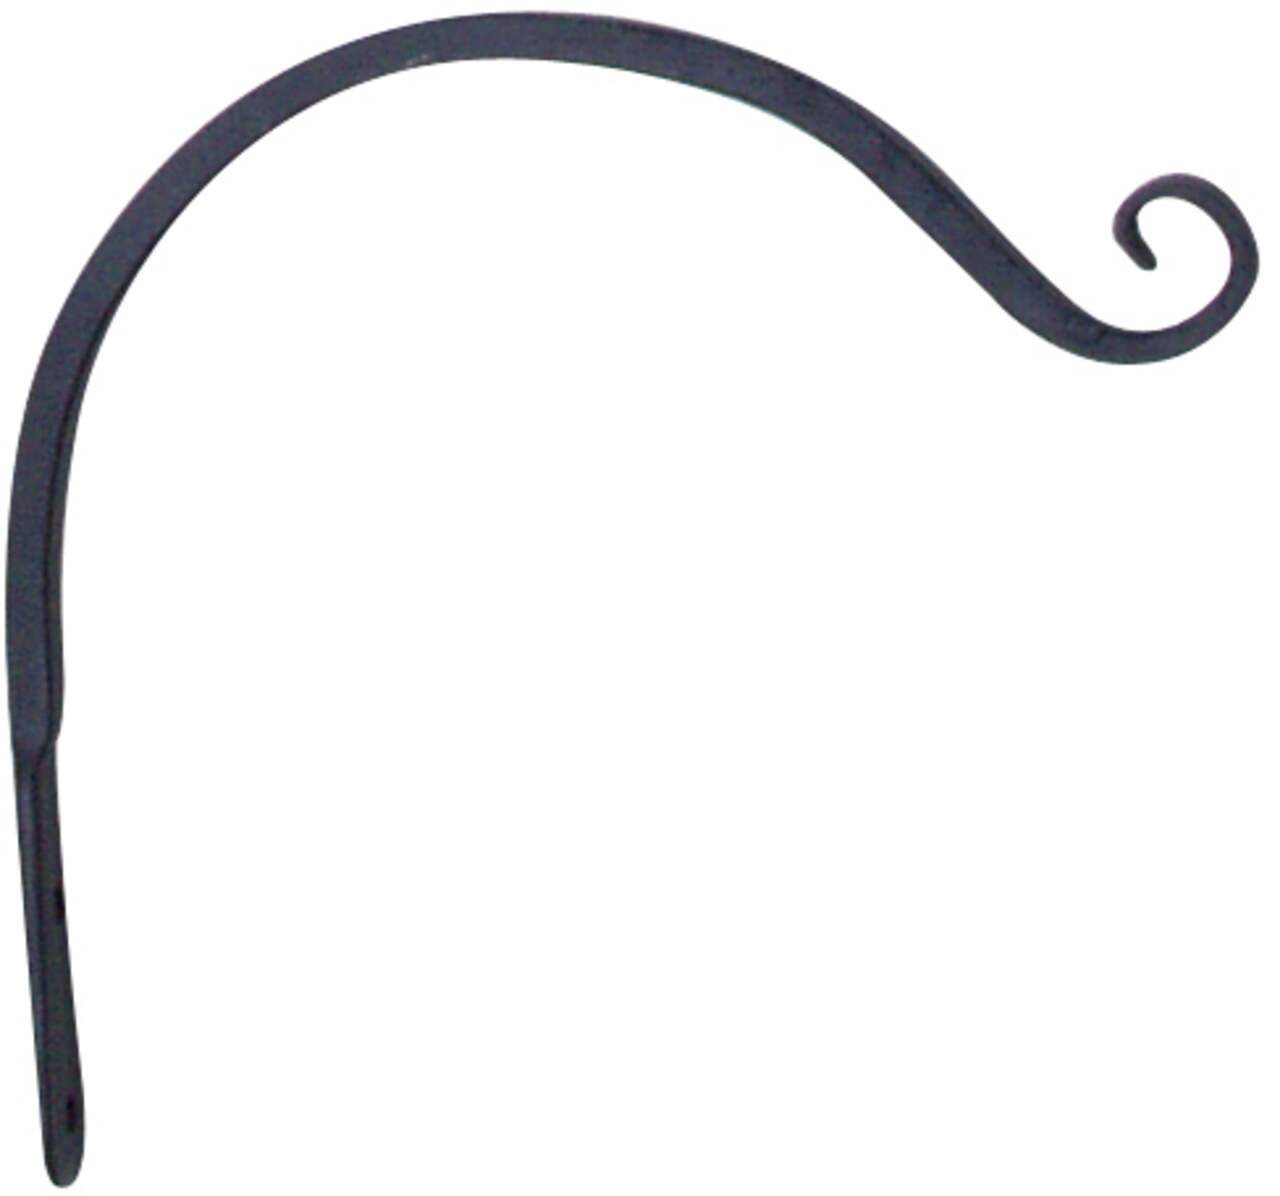 https://media-www.canadiantire.ca/product/seasonal-gardening/gardening/gardening-plant-accessories/1590483/12-curved-plant-hook-black-e16af875-ce71-48b1-88a8-17fc57dc4b71.png?imdensity=1&imwidth=640&impolicy=mZoom